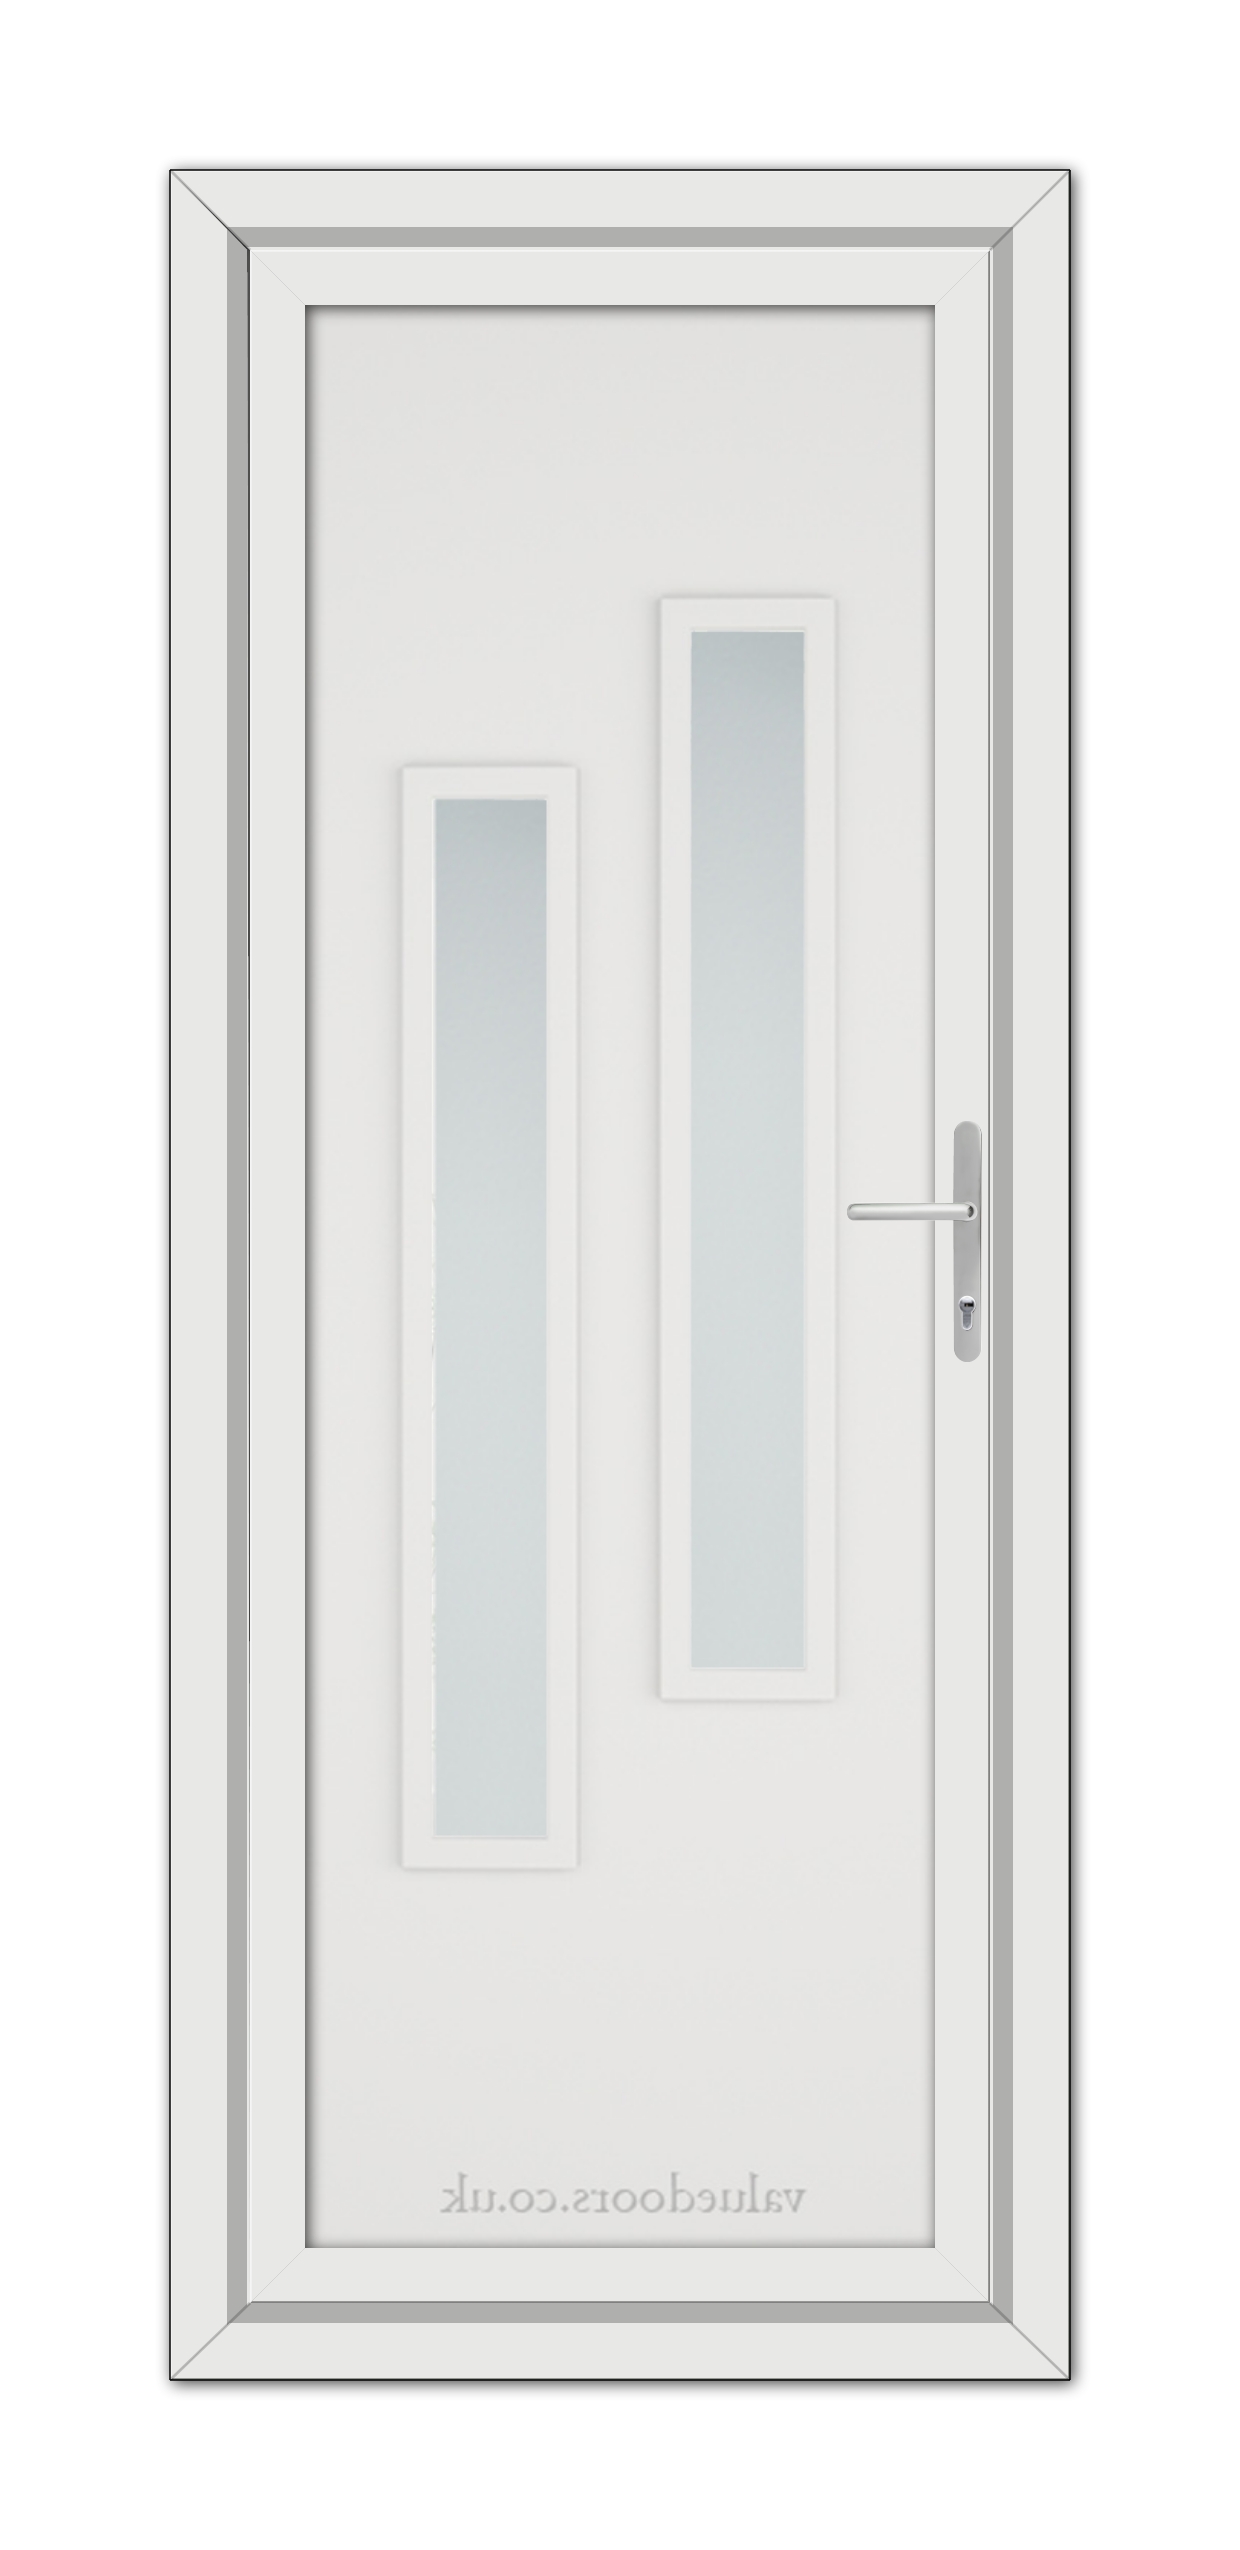 A White Modern 5082 uPVC Door featuring two vertical, frosted glass panels and a metallic handle, set within a simple frame.